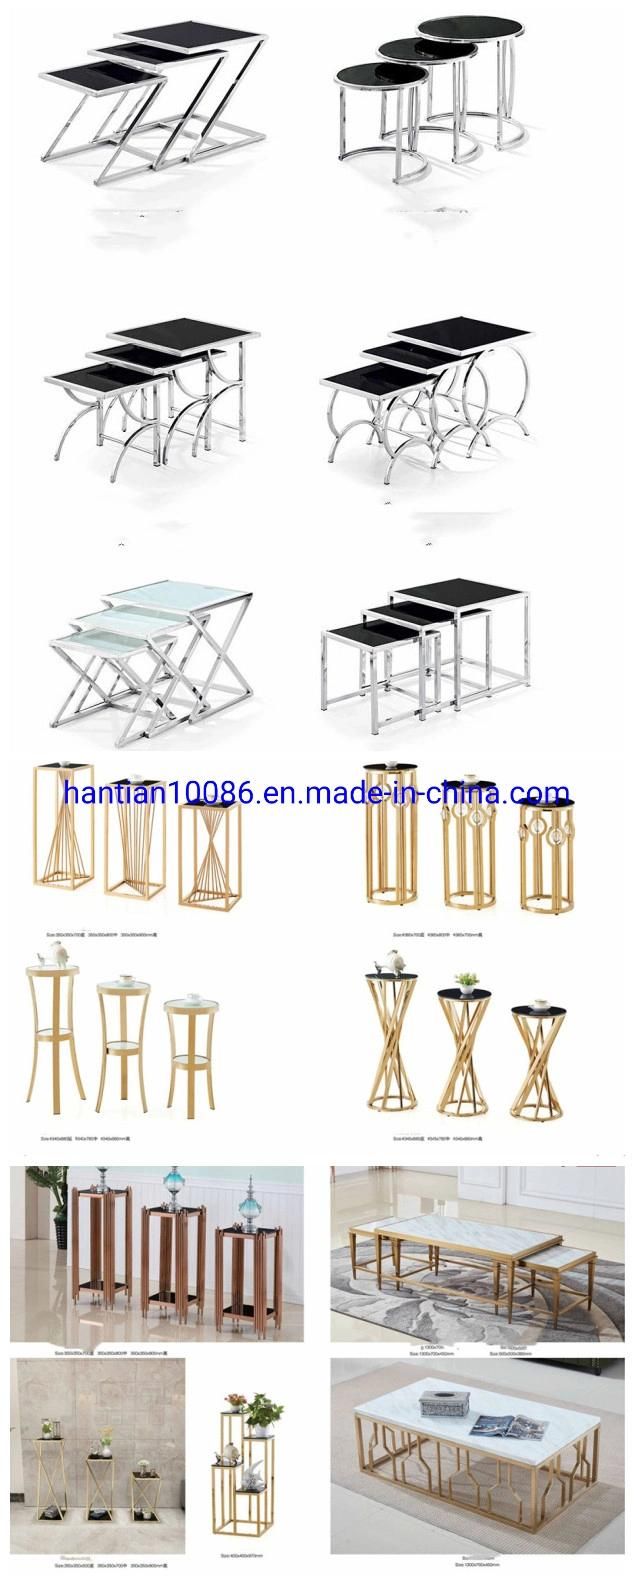 The Cafe Table Sweetmeats Long Western Square Table Milk Tea Restaurant Coffee Table